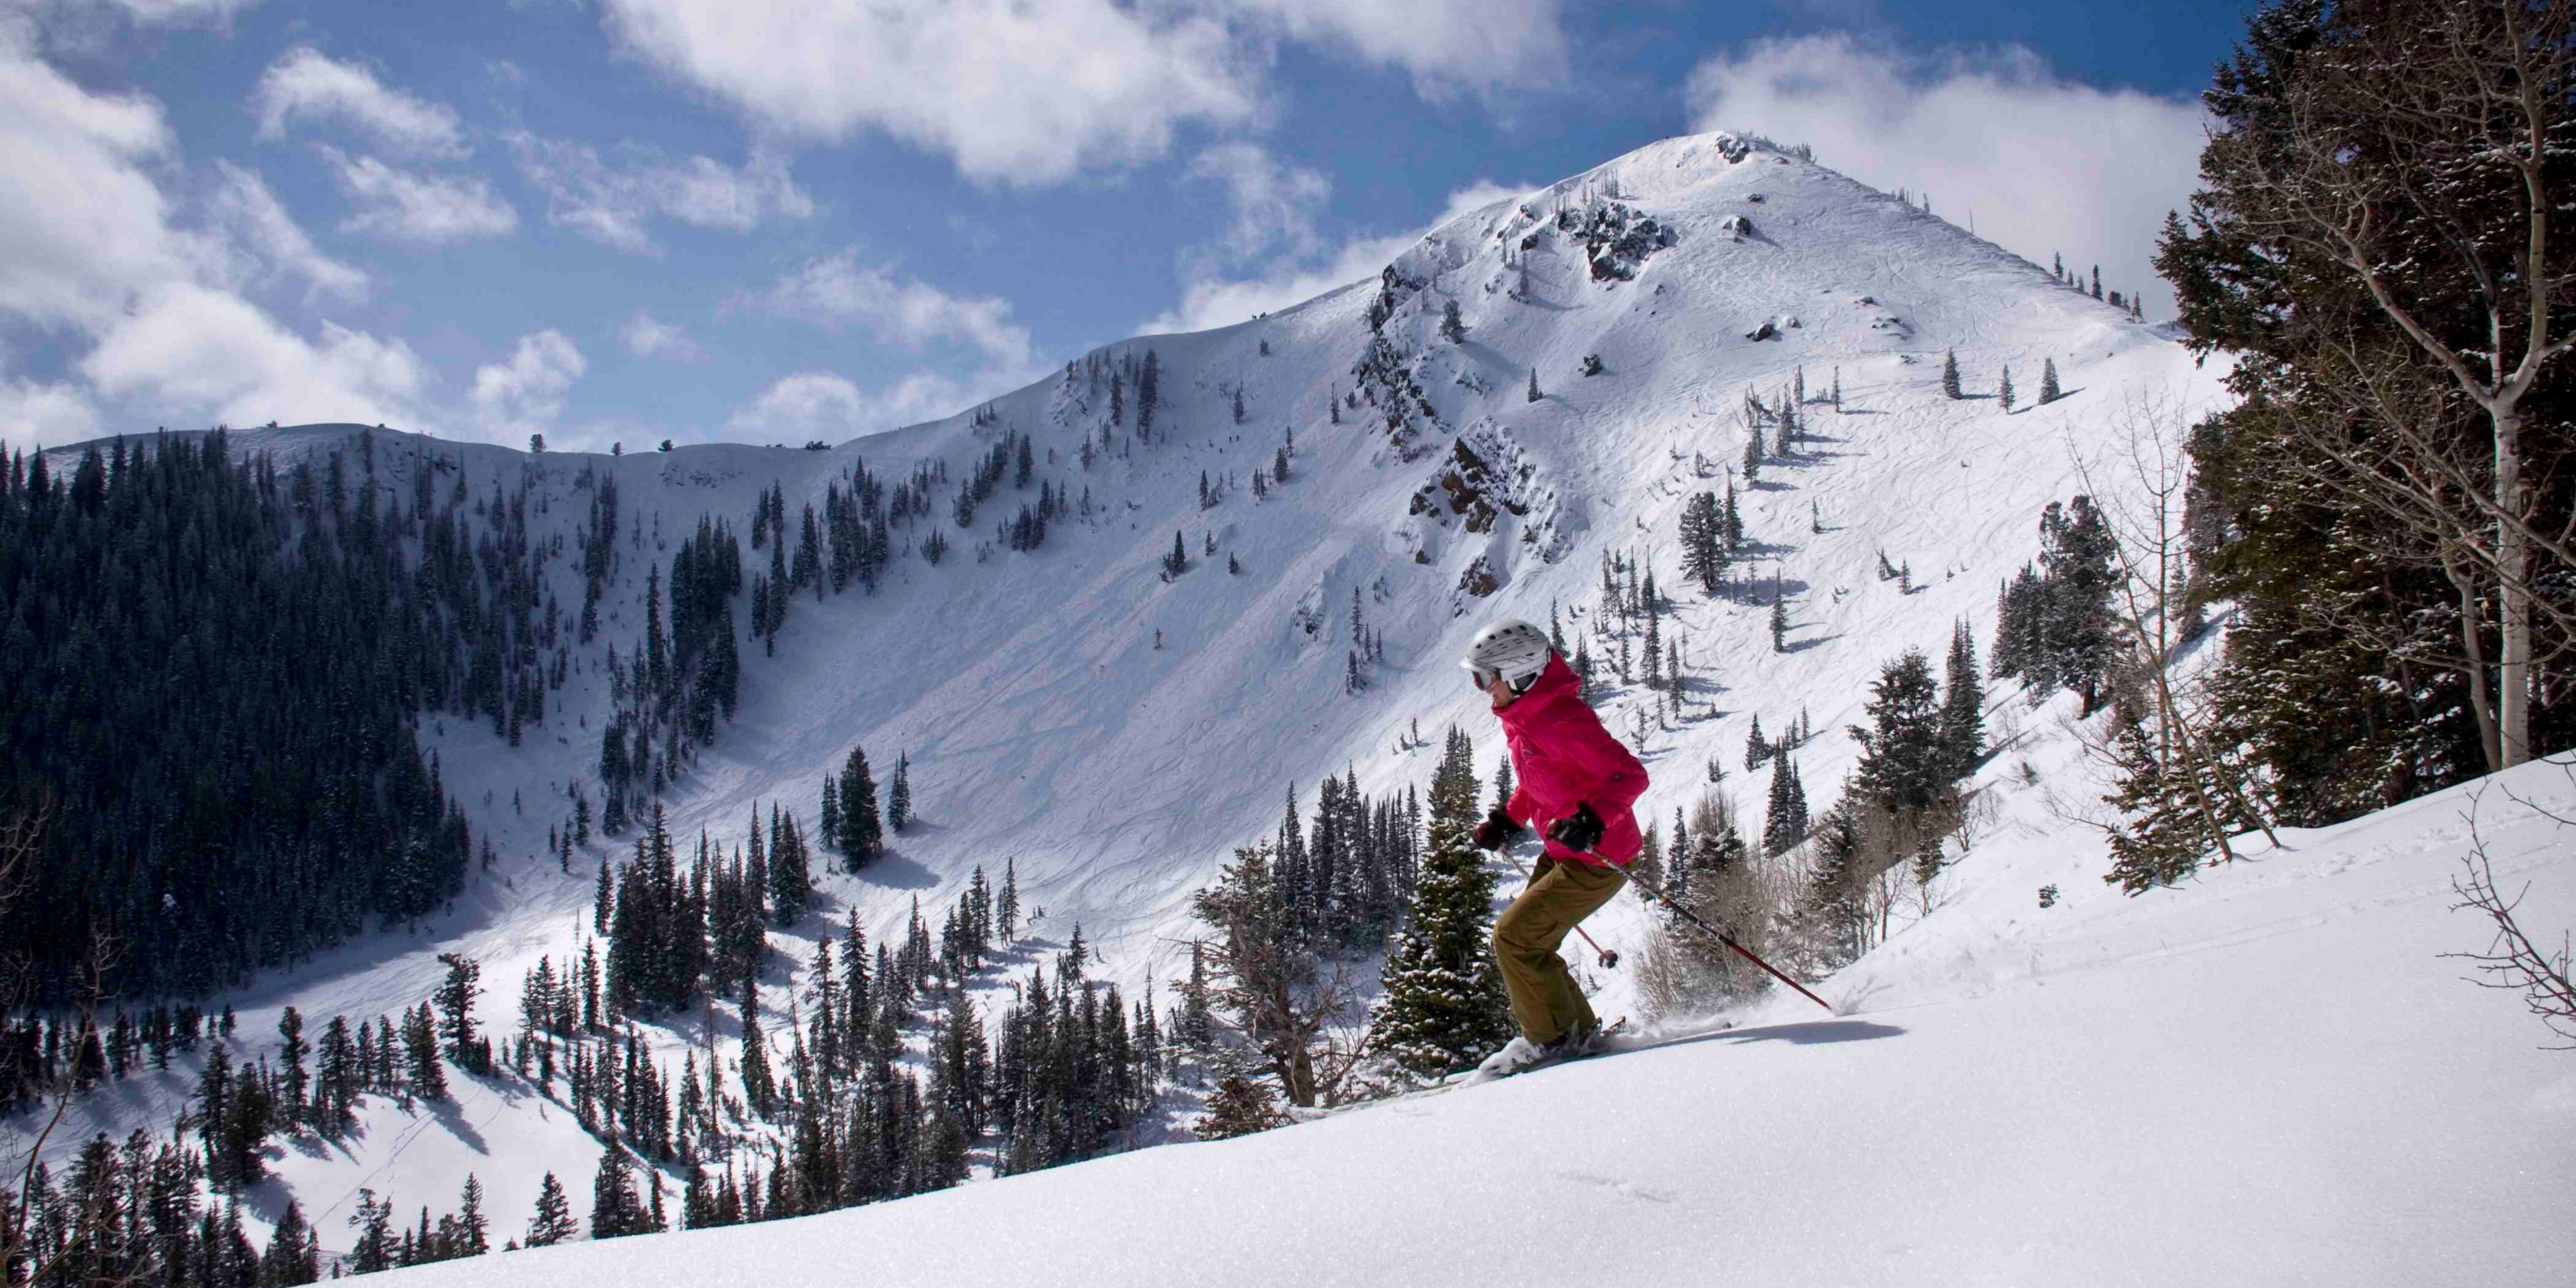 Unlike other ski destinations, once you’ve deplaned and grabbed your bags, you’re just 20 miles from The Greatest Snow on Earth®.  With premier ski resorts like Brighton, Solitude, Snowbird and Alta, you will have less time in the car and more time on the mountain.